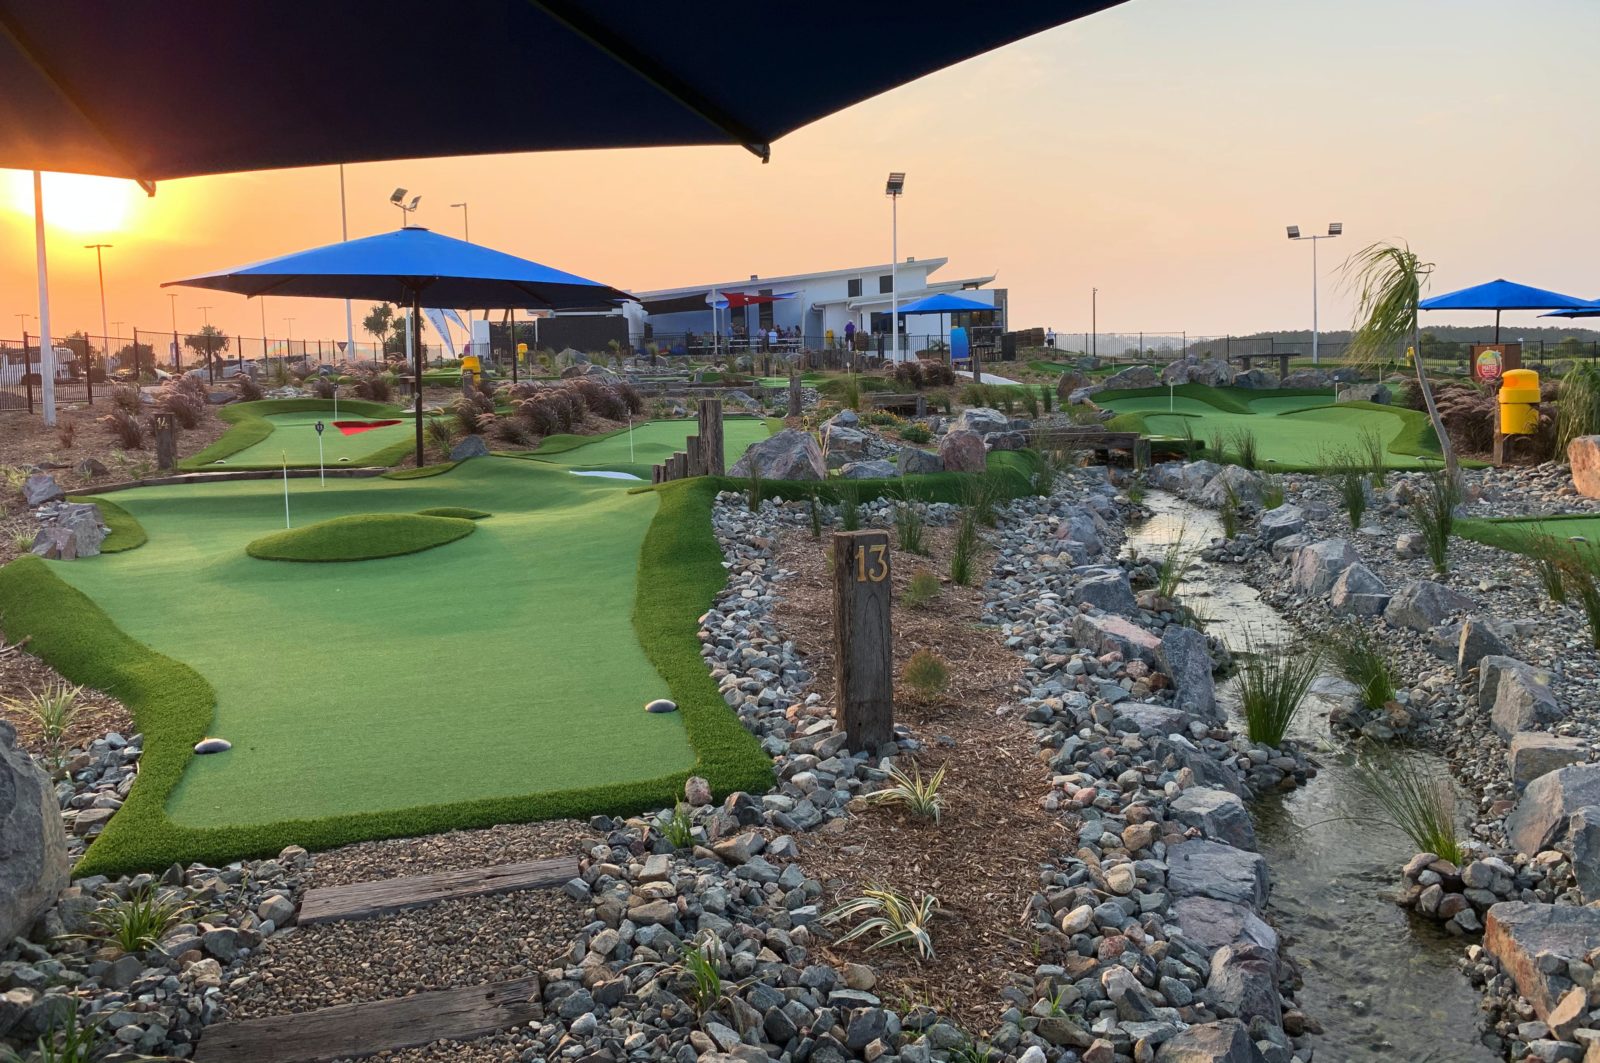 Maroochy River Mini Golf invites you to come and enjoy their facilities. You won’t be disappointed.